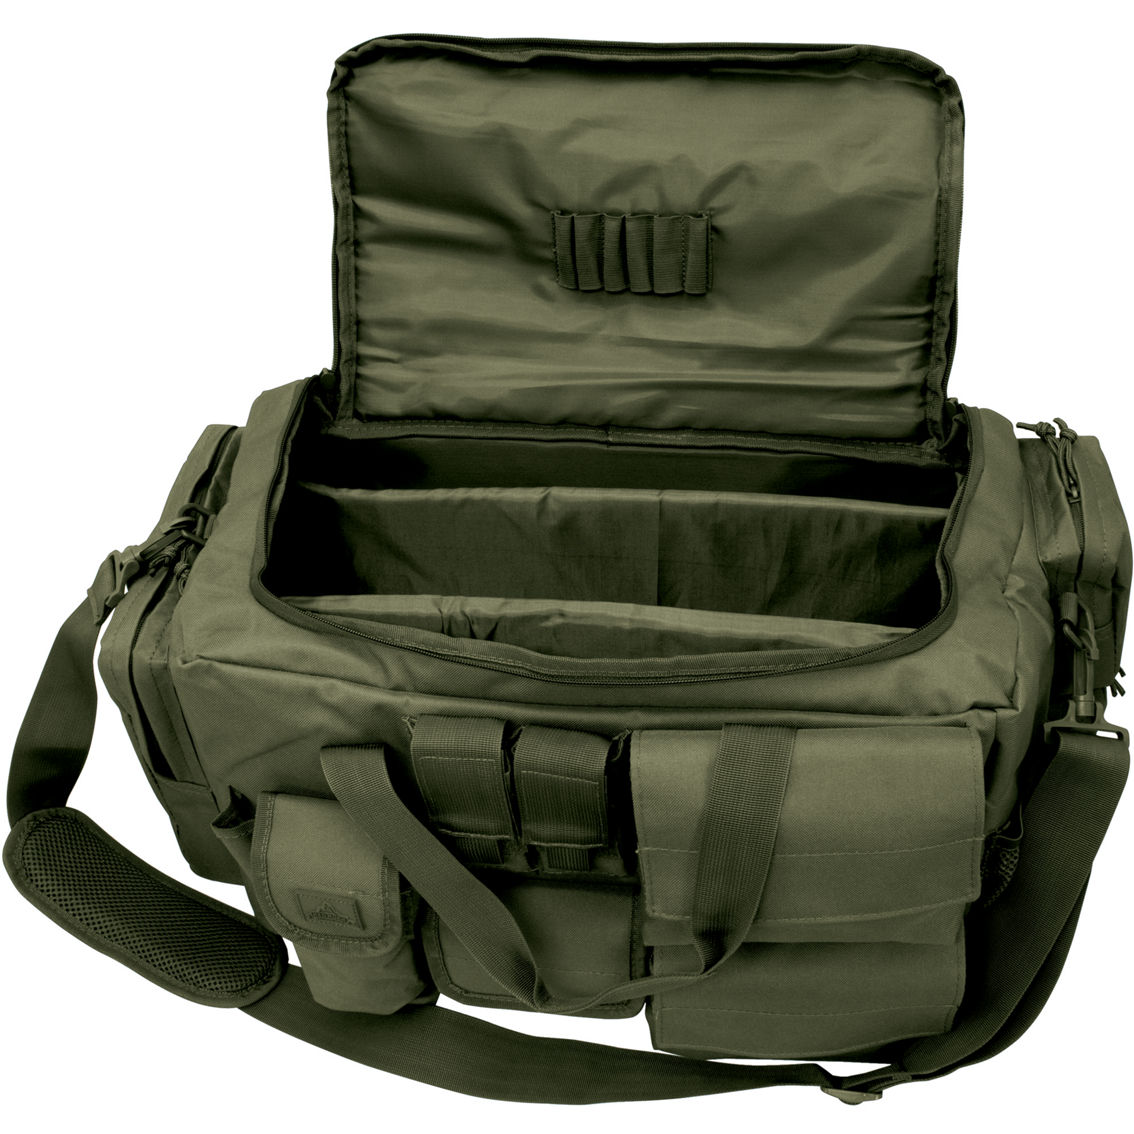 Red Rock Outdoor Gear Operations Duffel Bag - Image 6 of 6